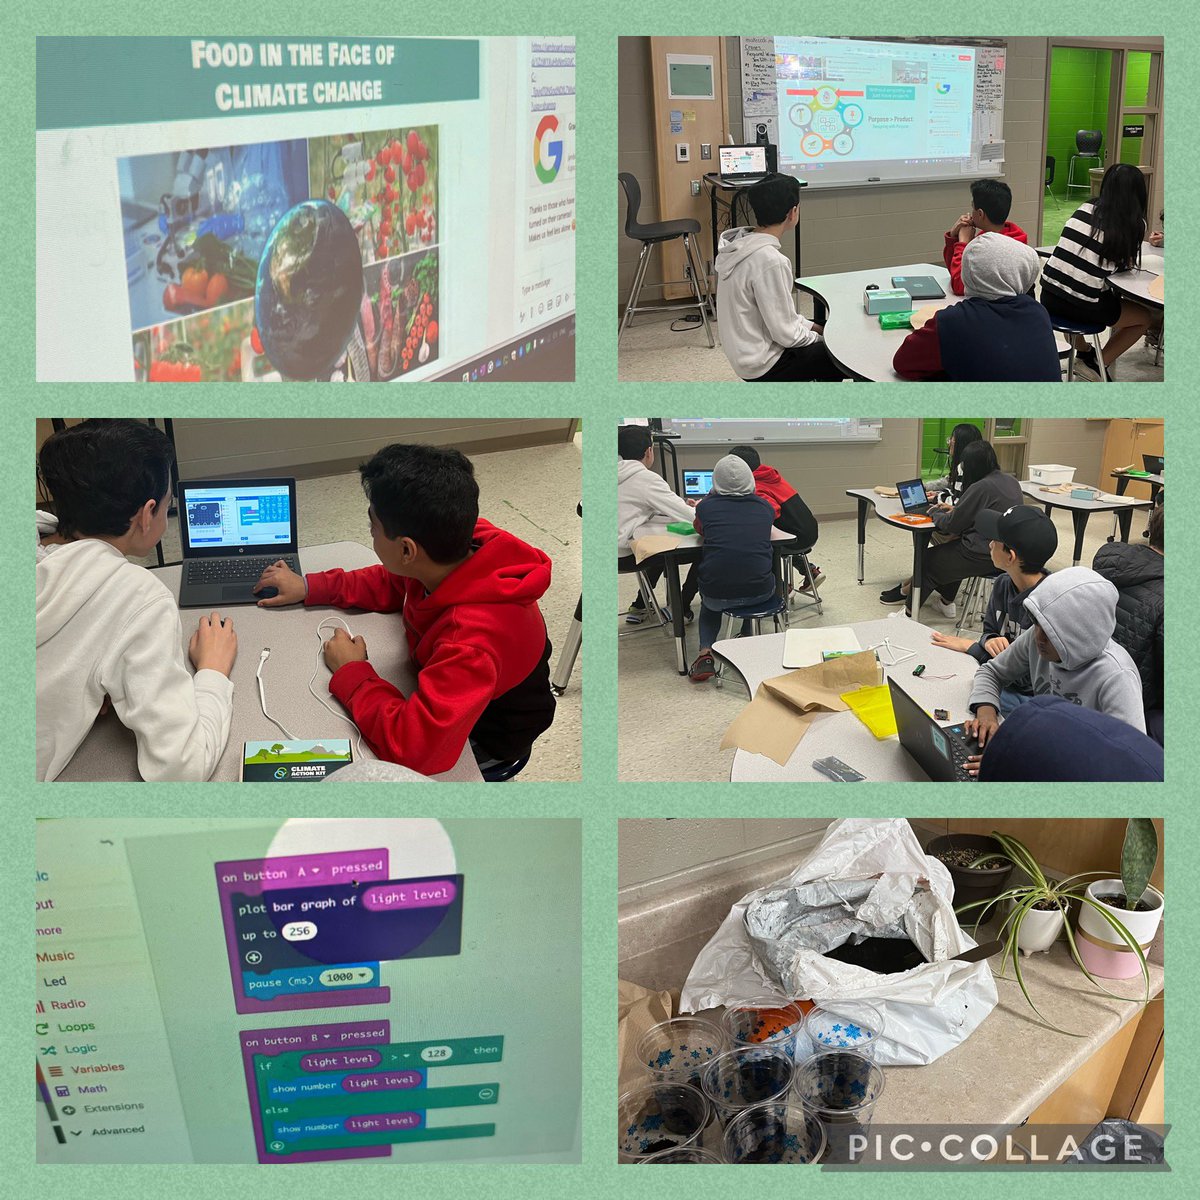 @cedarhollowps Gr7s were engaged throughout today’s Microbit Food in the Face of Climate Change session. Coding @microbit_edu and creating a water irrigation system using the Climate Action Kits. 🌱 Thanks @dtangred @MandyCleland1 @ElliseMackie #tvdsbllc #thehollow